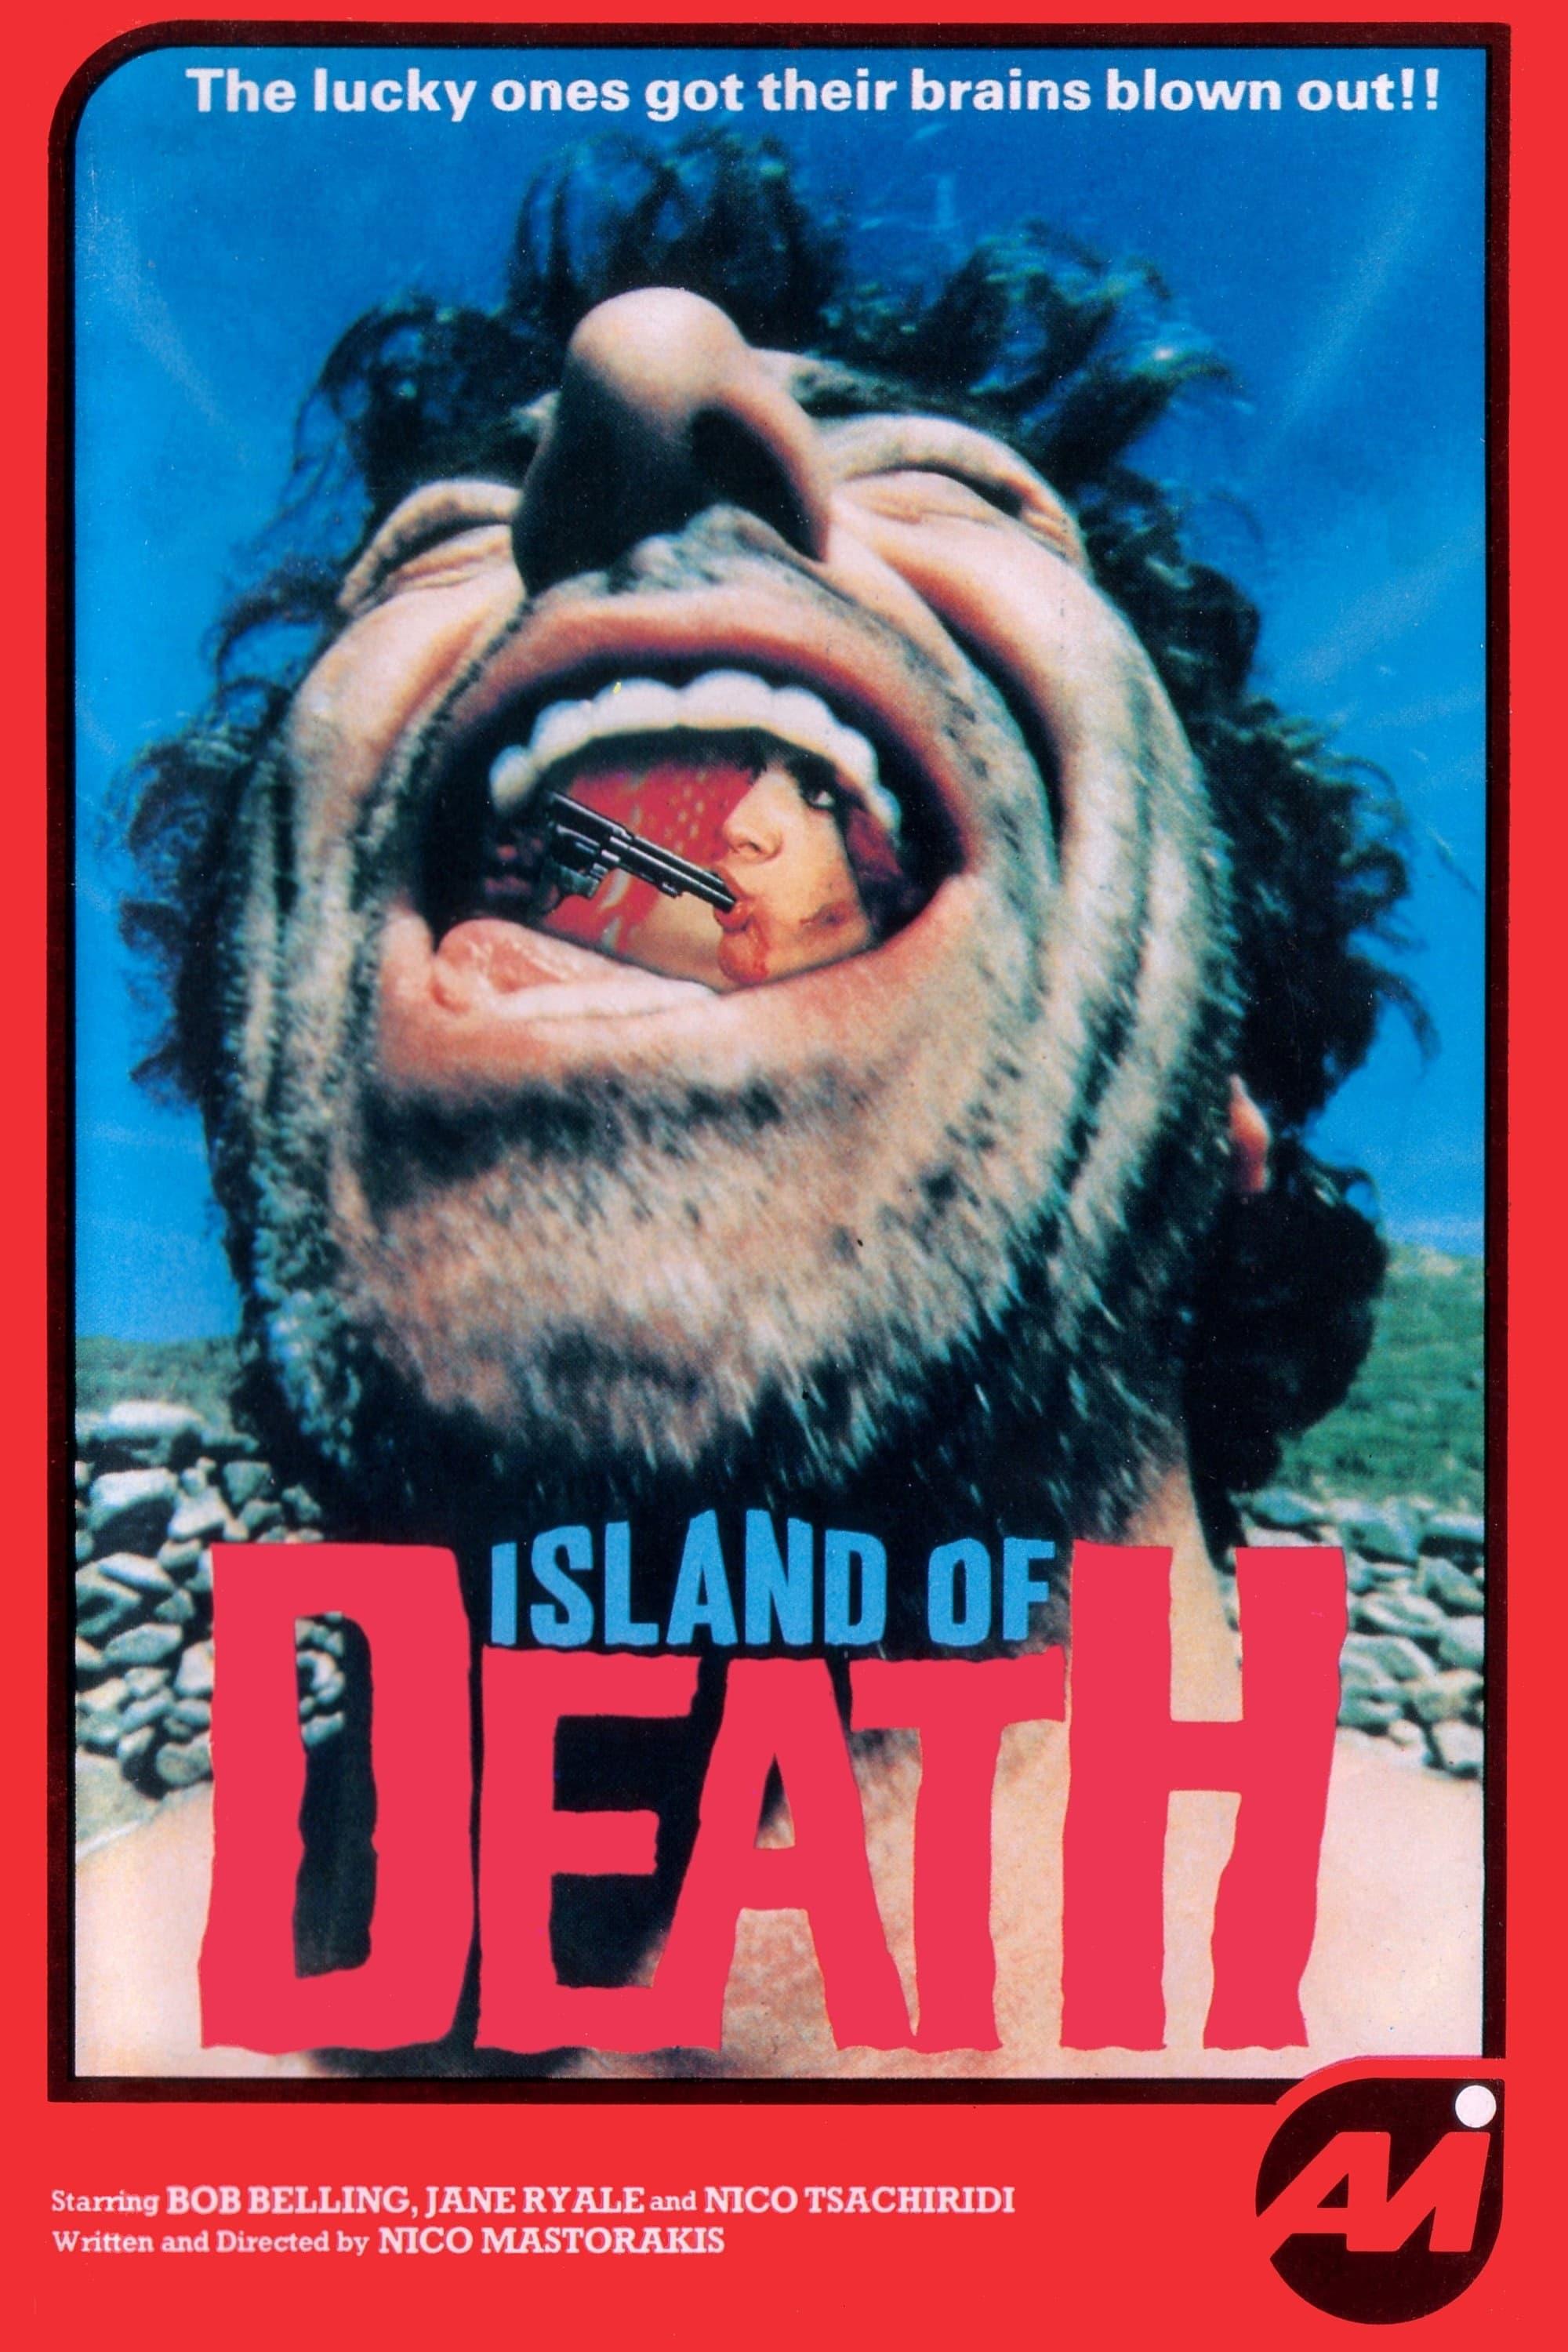 Island of Death poster